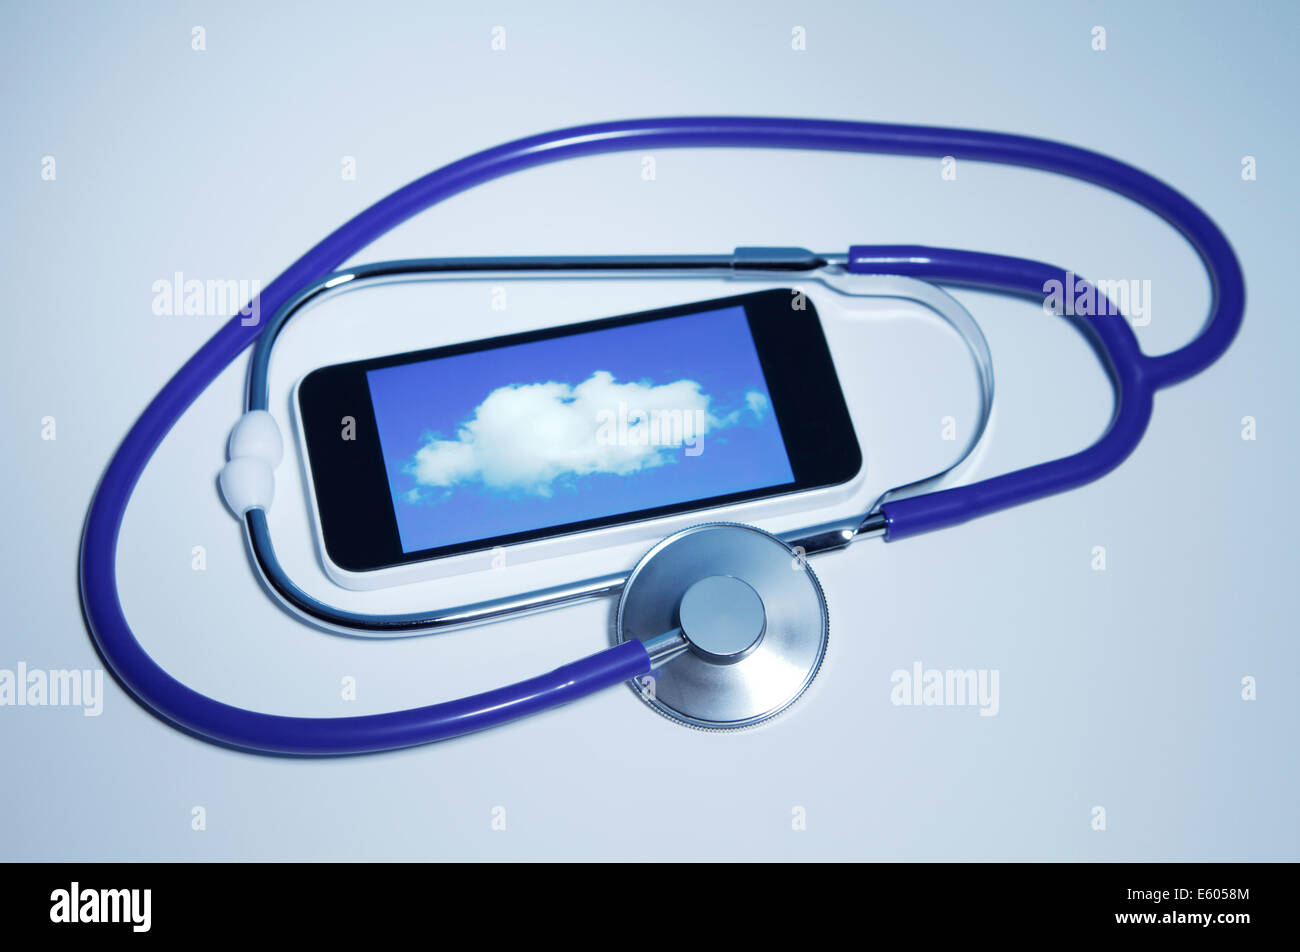 Cloud medicine Acoustic stethoscope and an Apple iPhone 5c that displays a cloud. All logos removed. Stock Photo